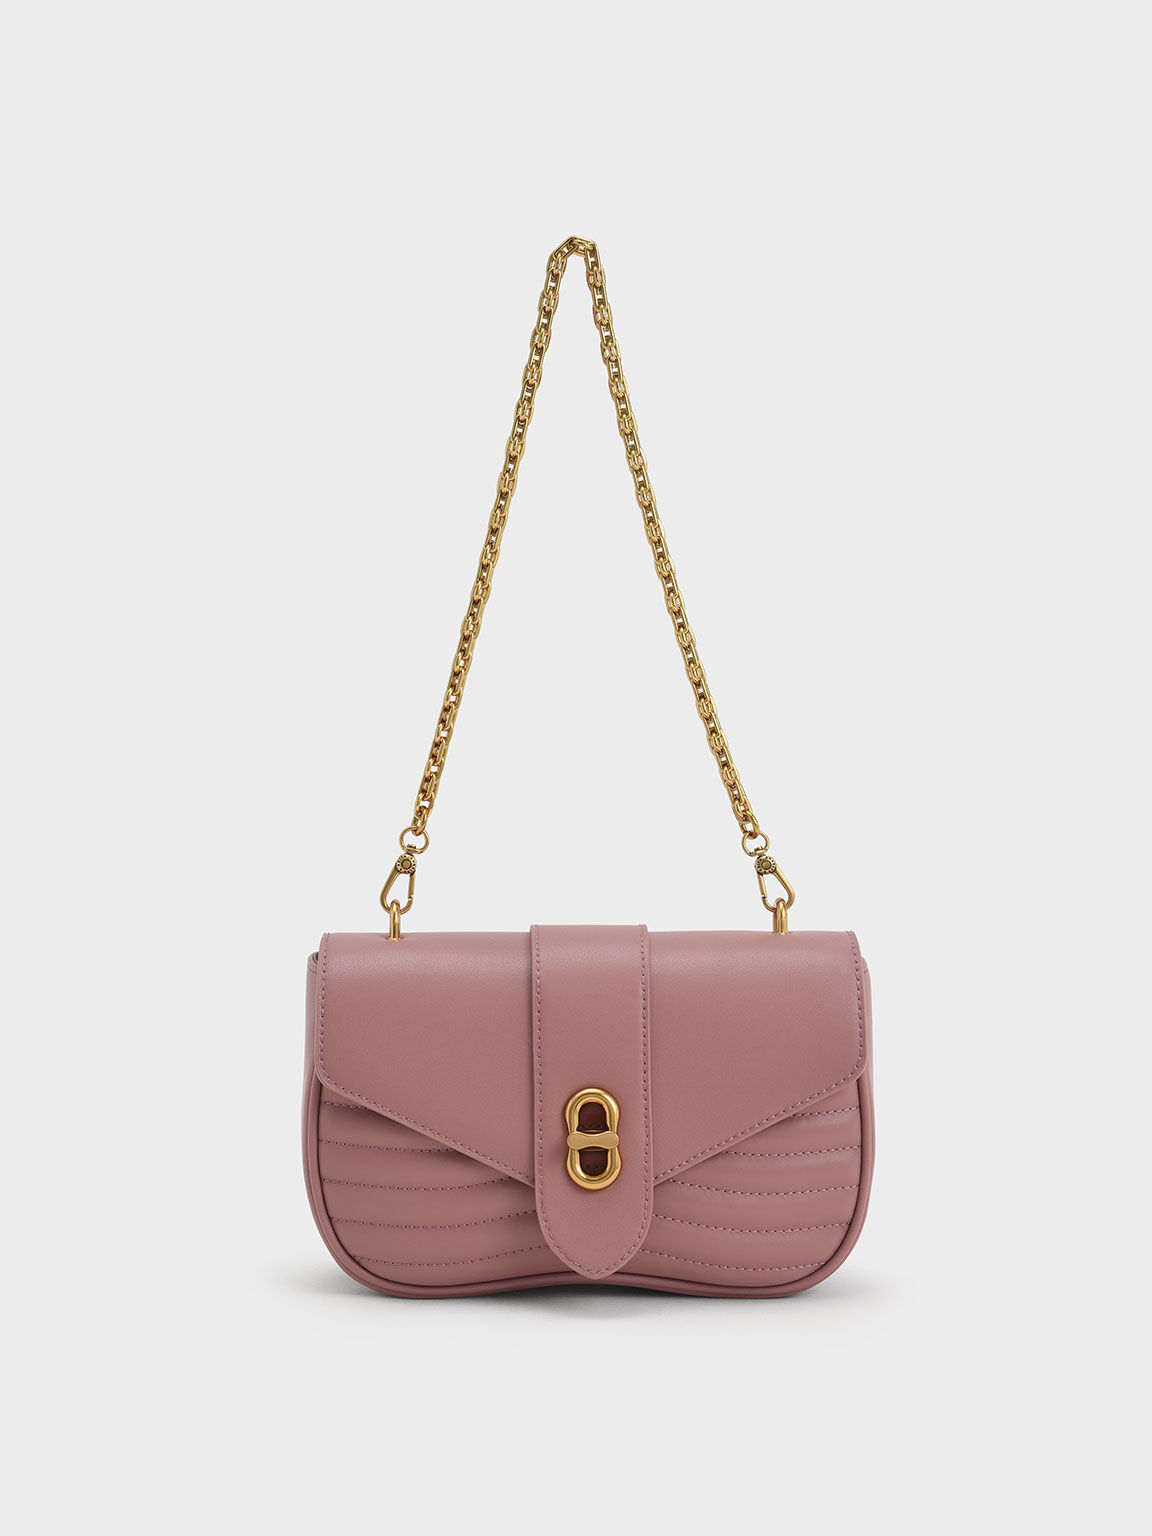 Women's Crossbody Bags | Exclusive Styles - CHARLES & KEITH SE